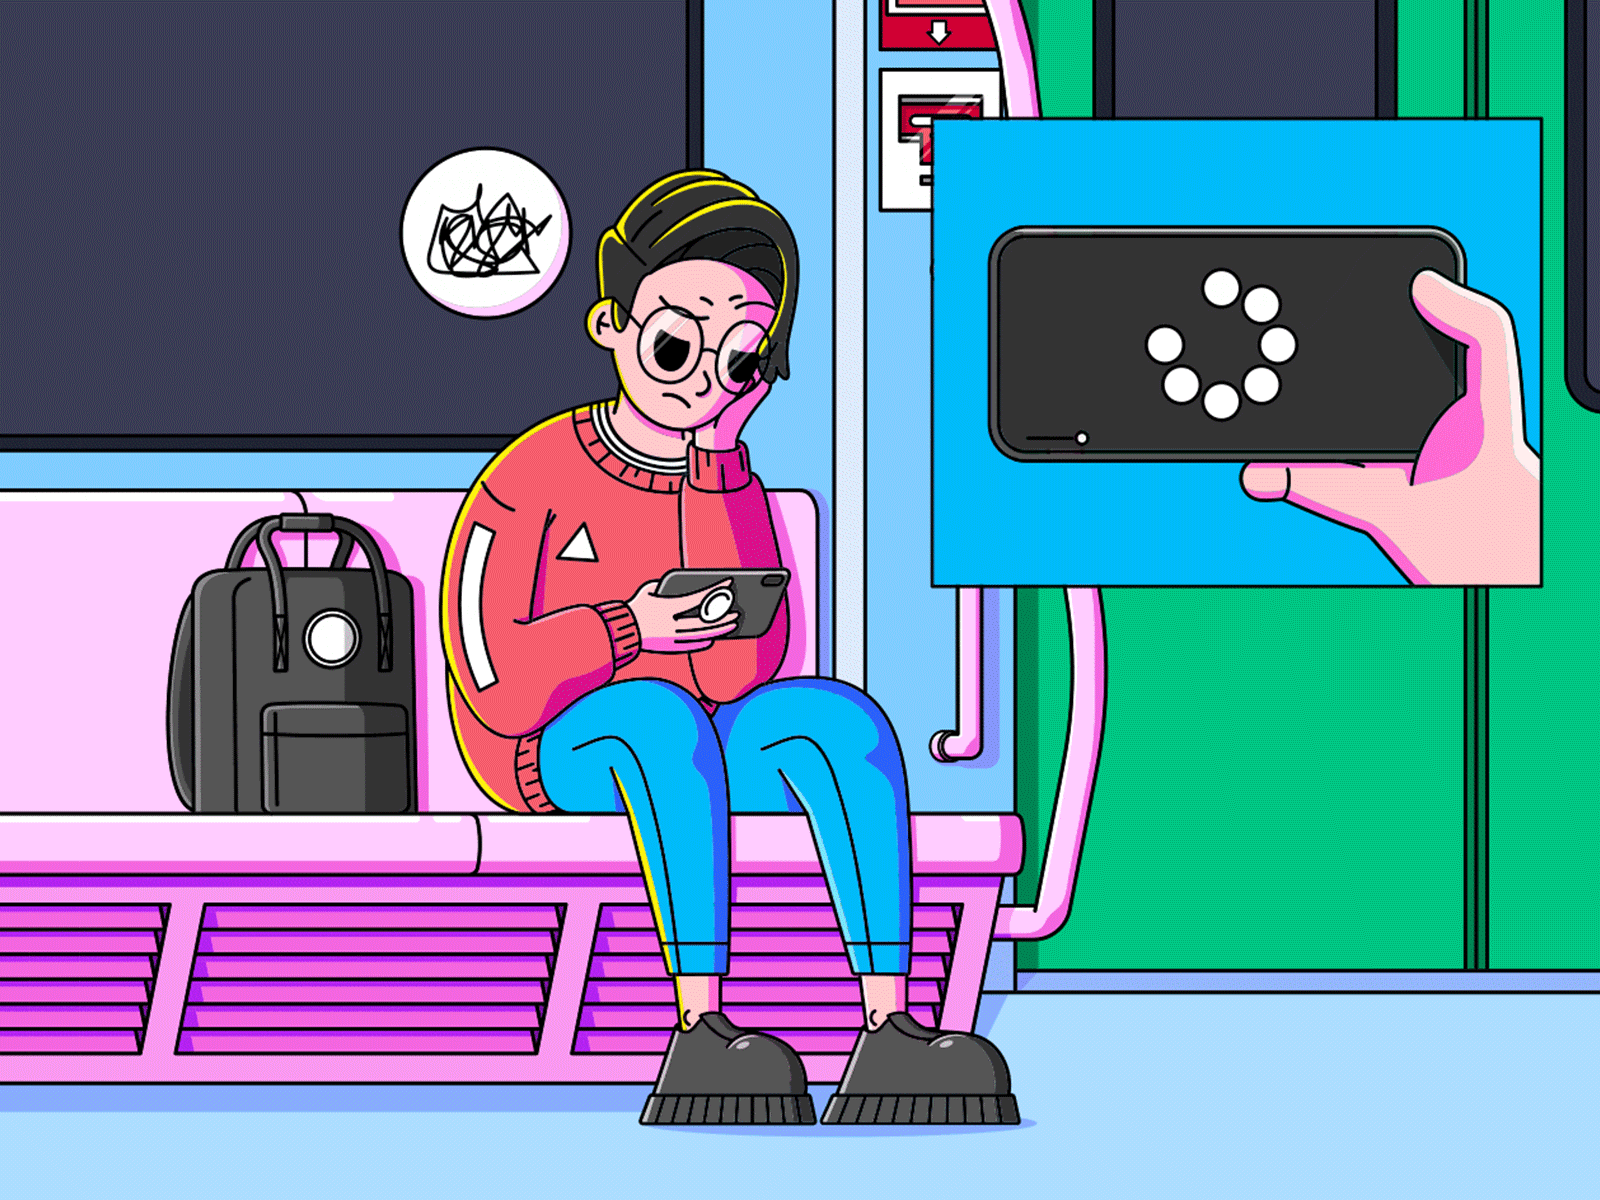 Connection Problems boy character character design cute graphic design illustration subway train vector wifi 그래픽디자인